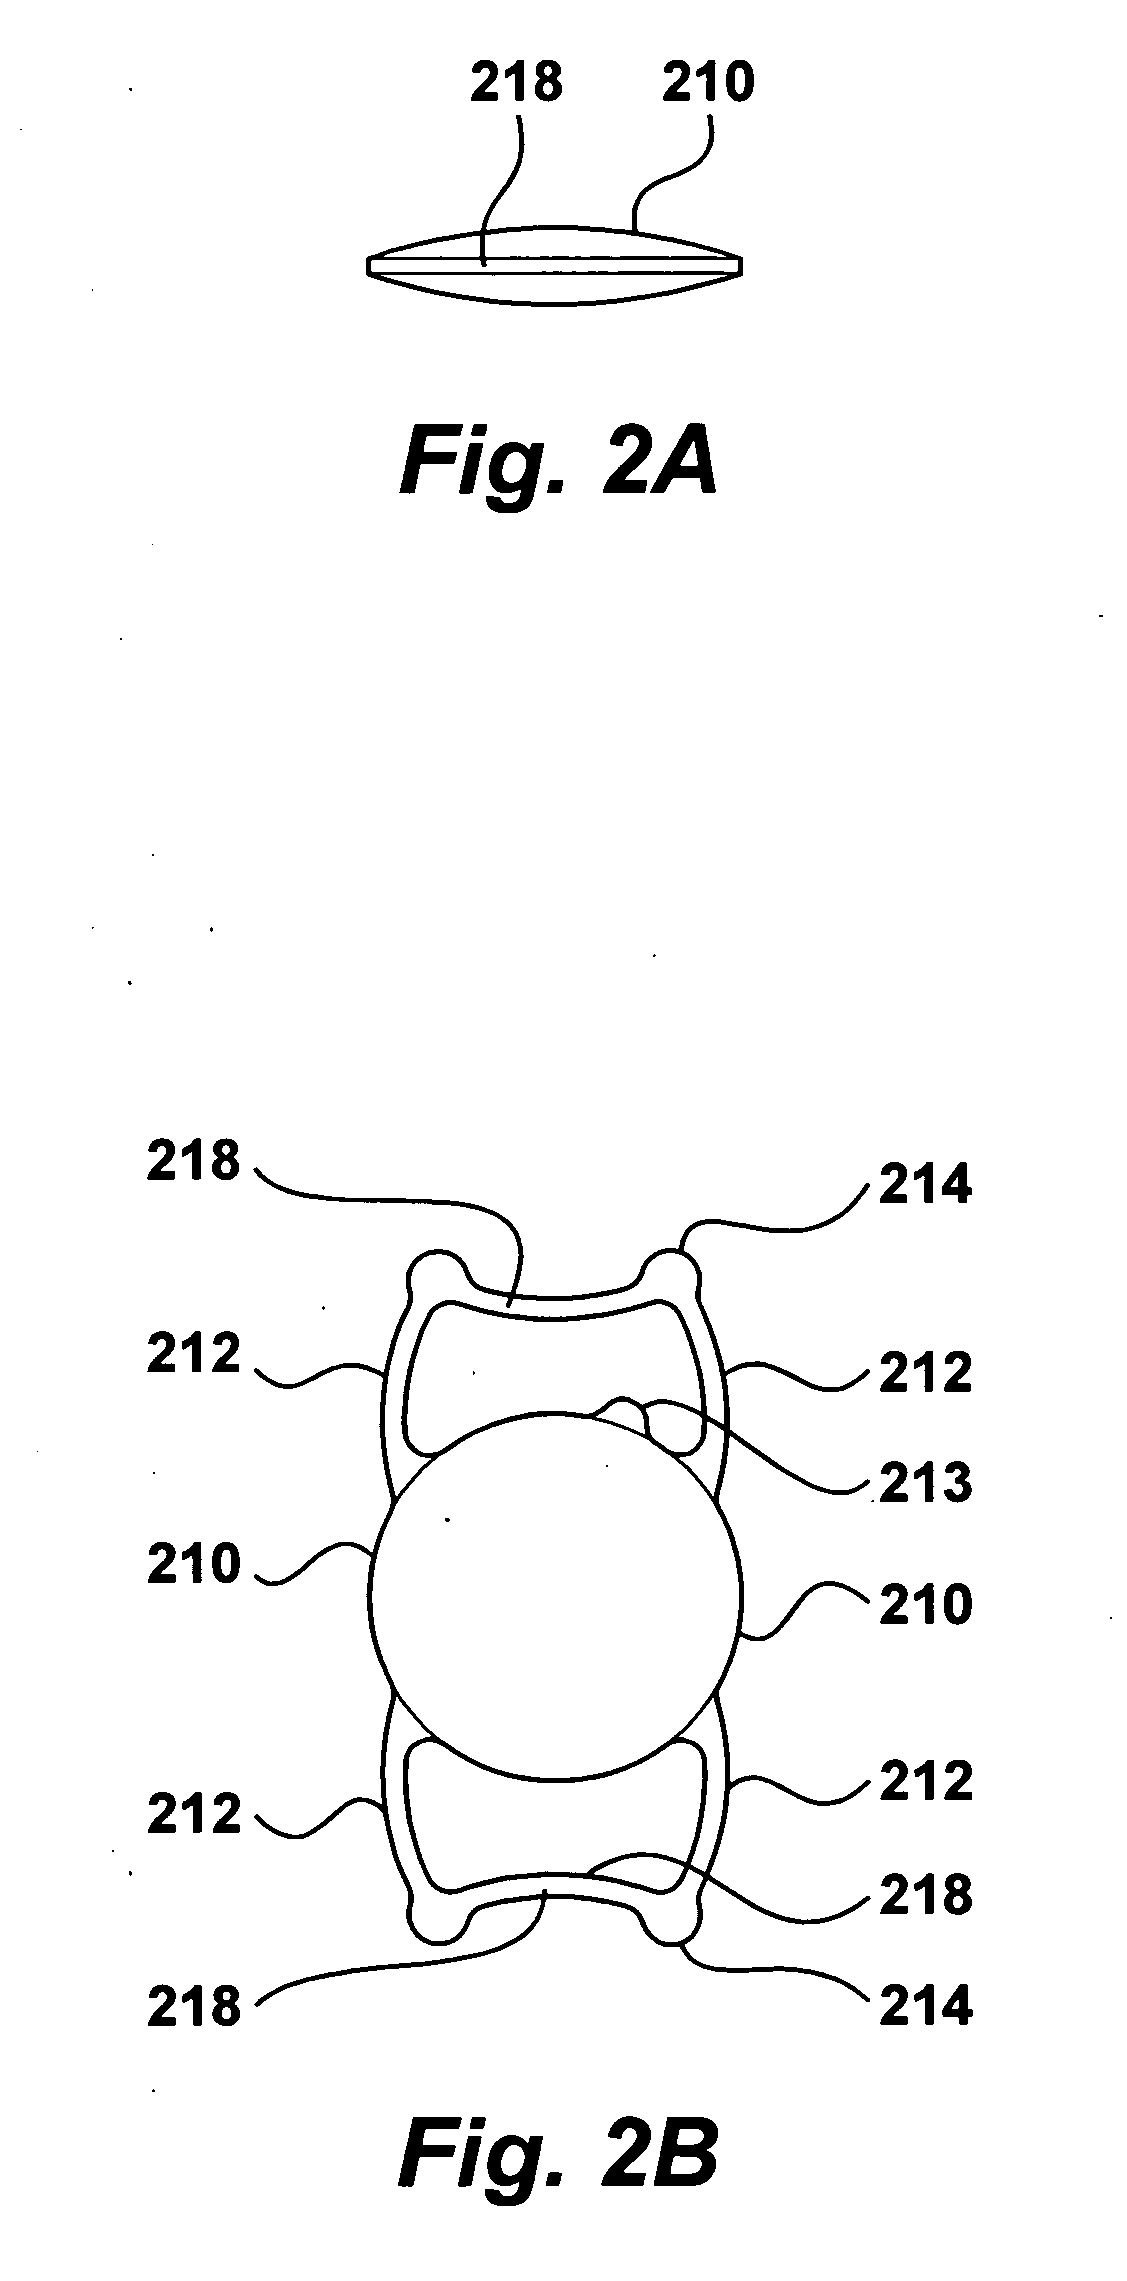 System and method for storing, shipping and injecting ocular devices